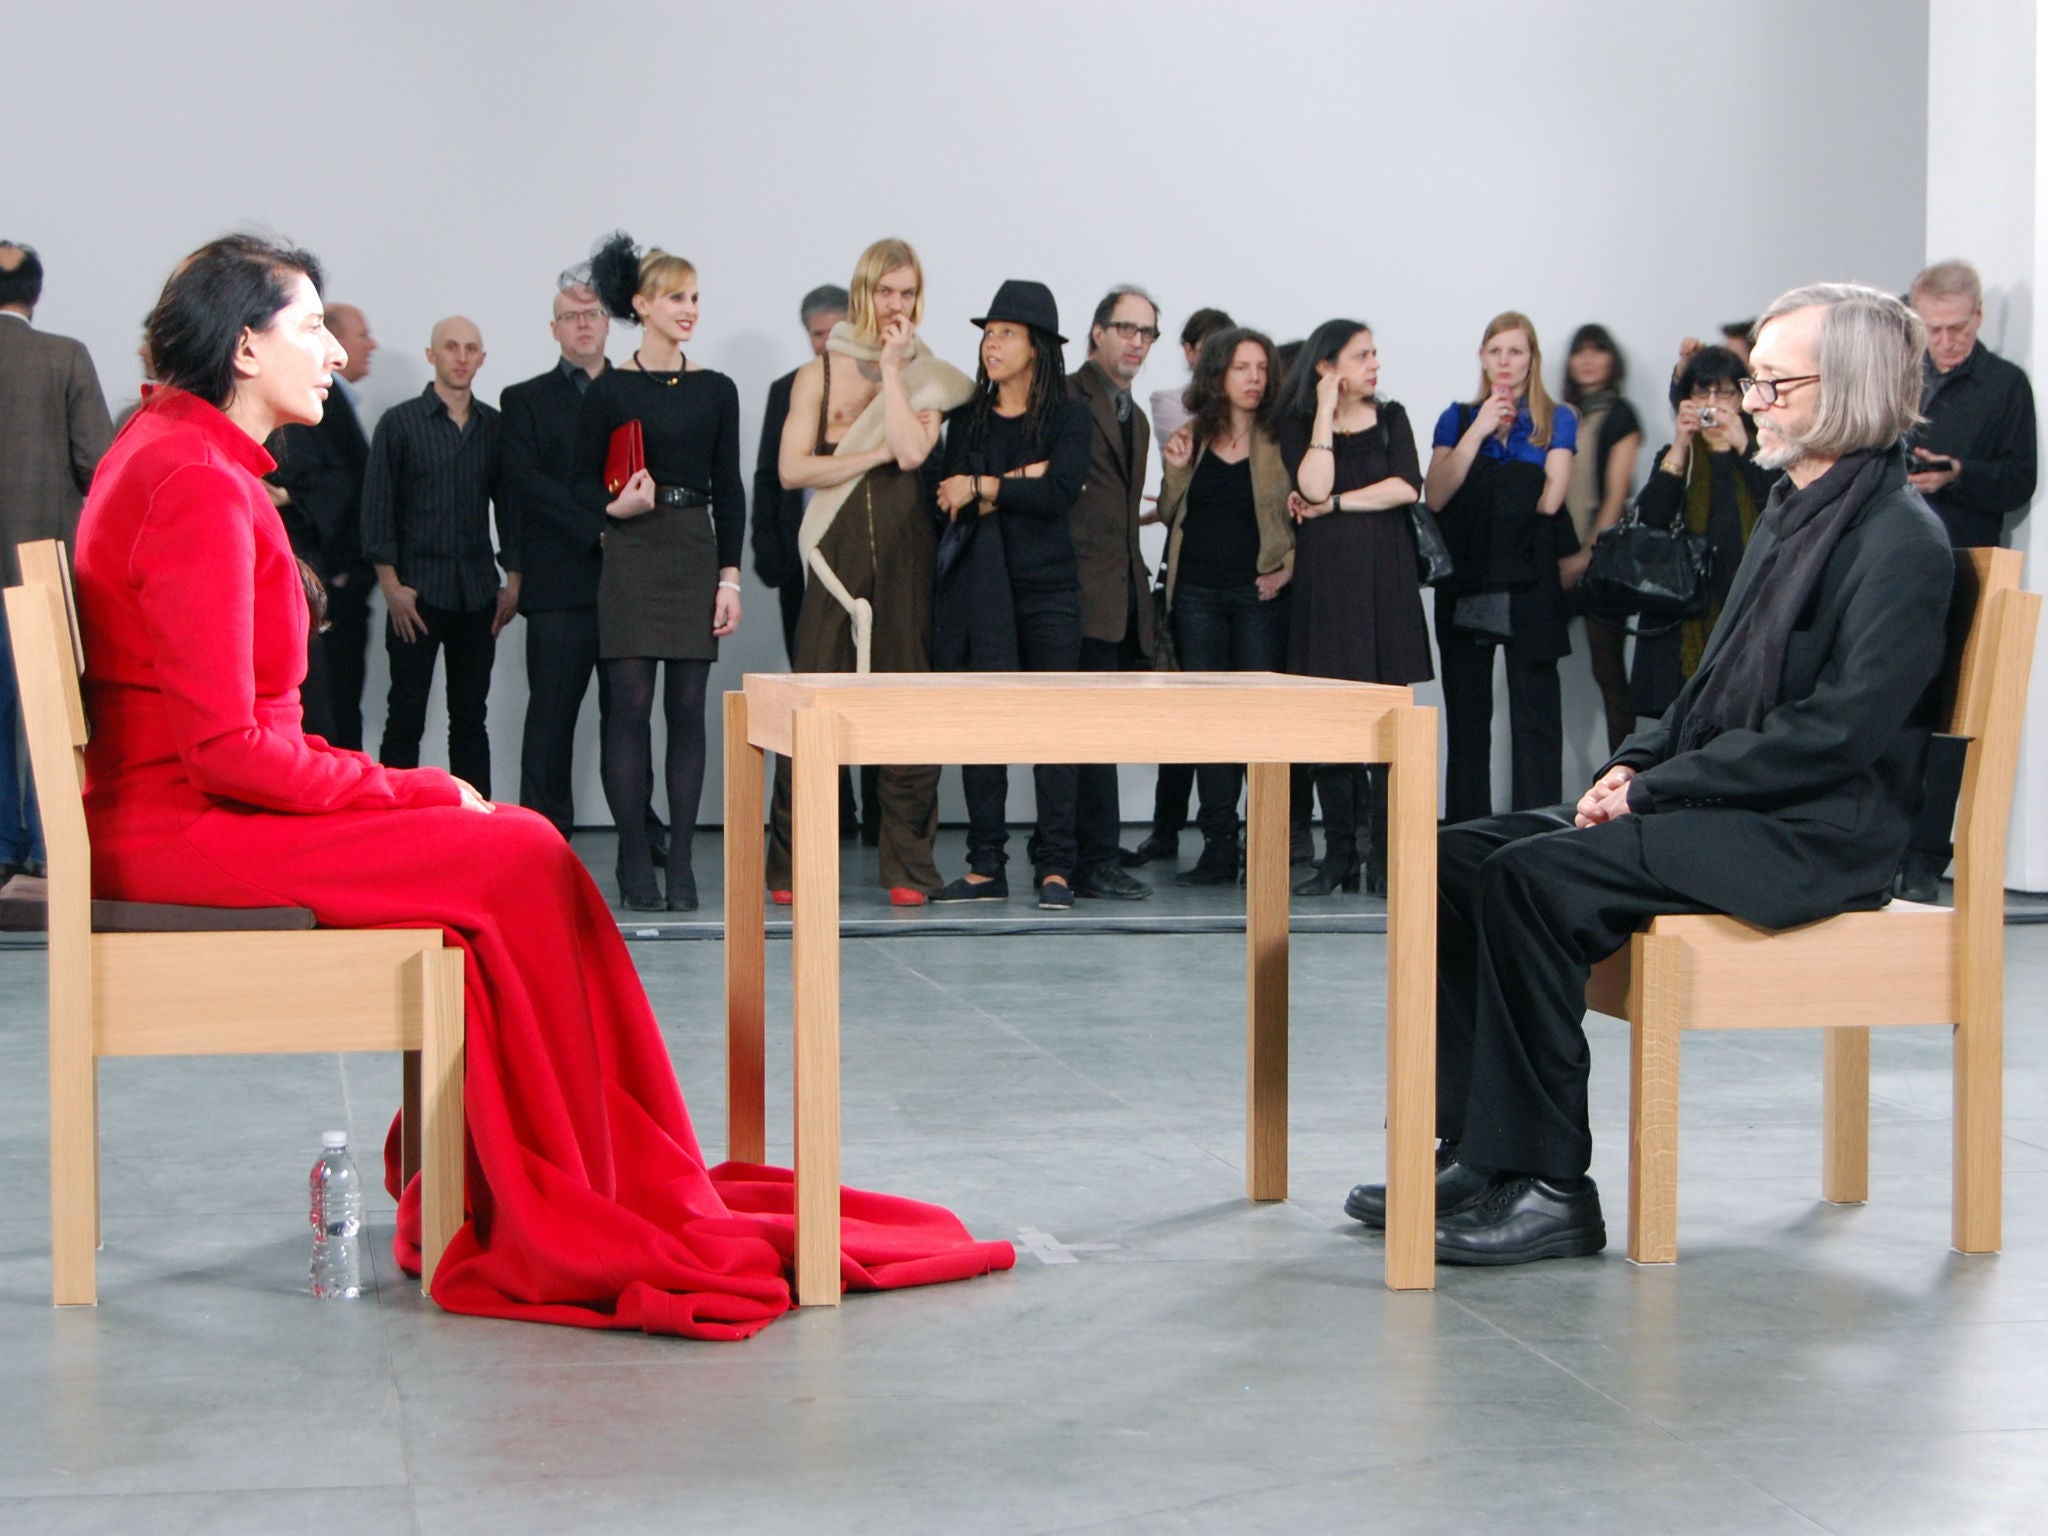 Marina Abramovic performs The Artist is Present at Moma in 2010